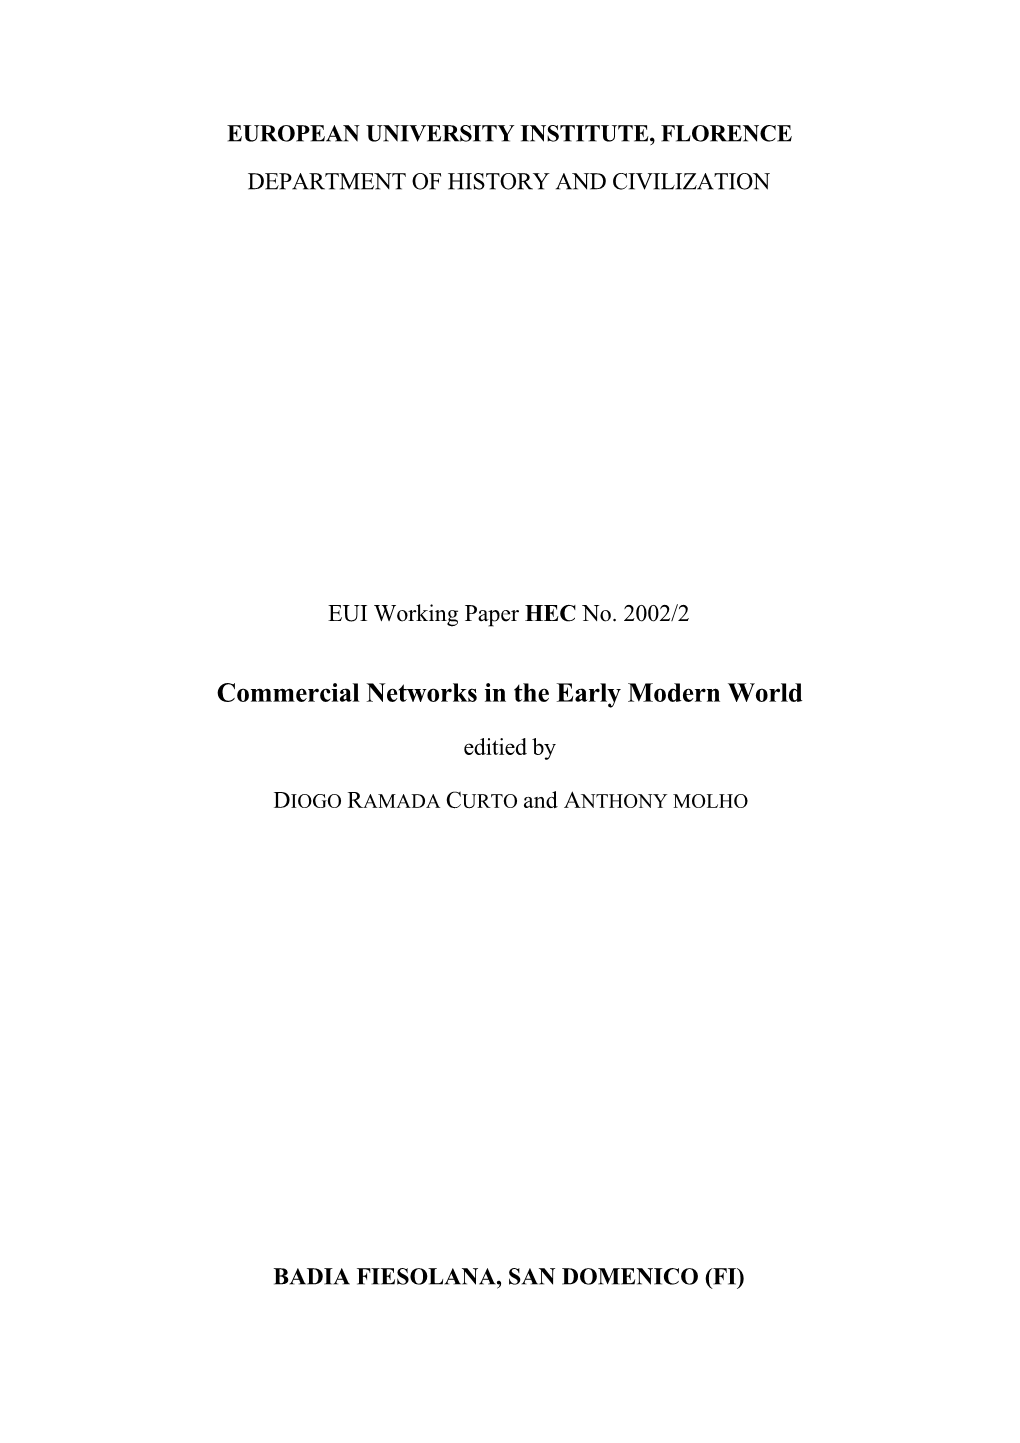 Commercial Networks in the Early Modern World